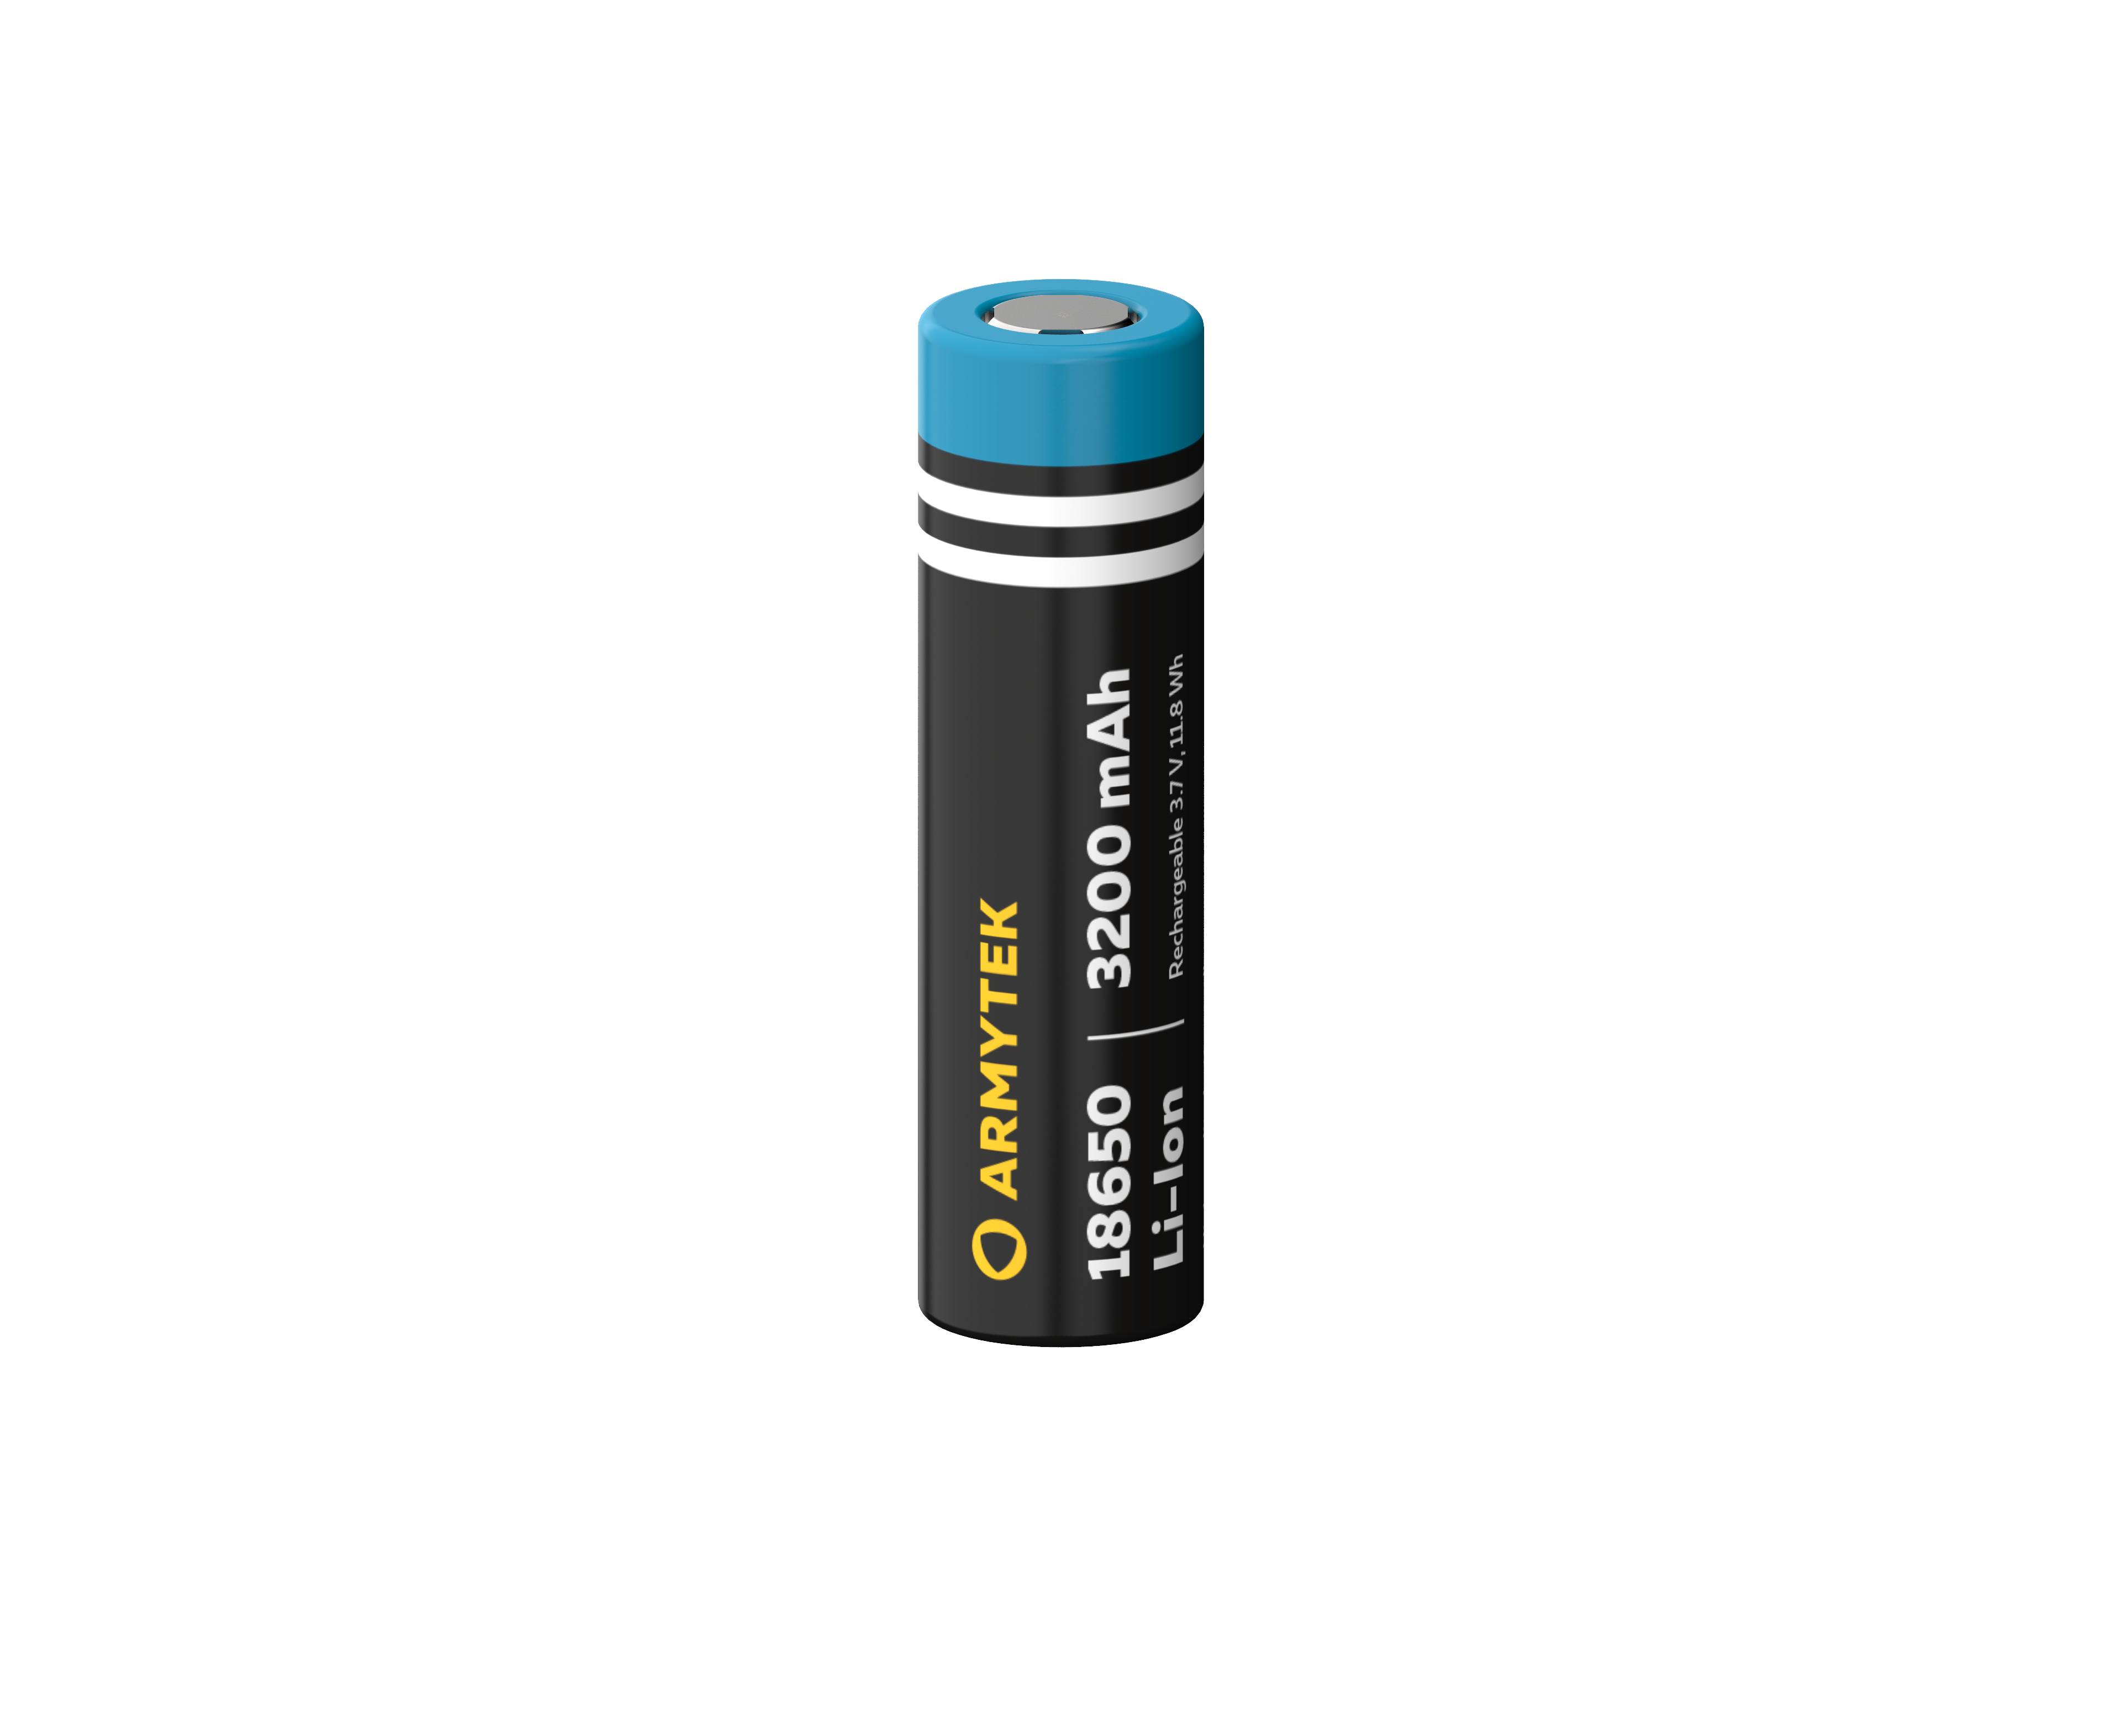 18650 Battery, Lithium-ion